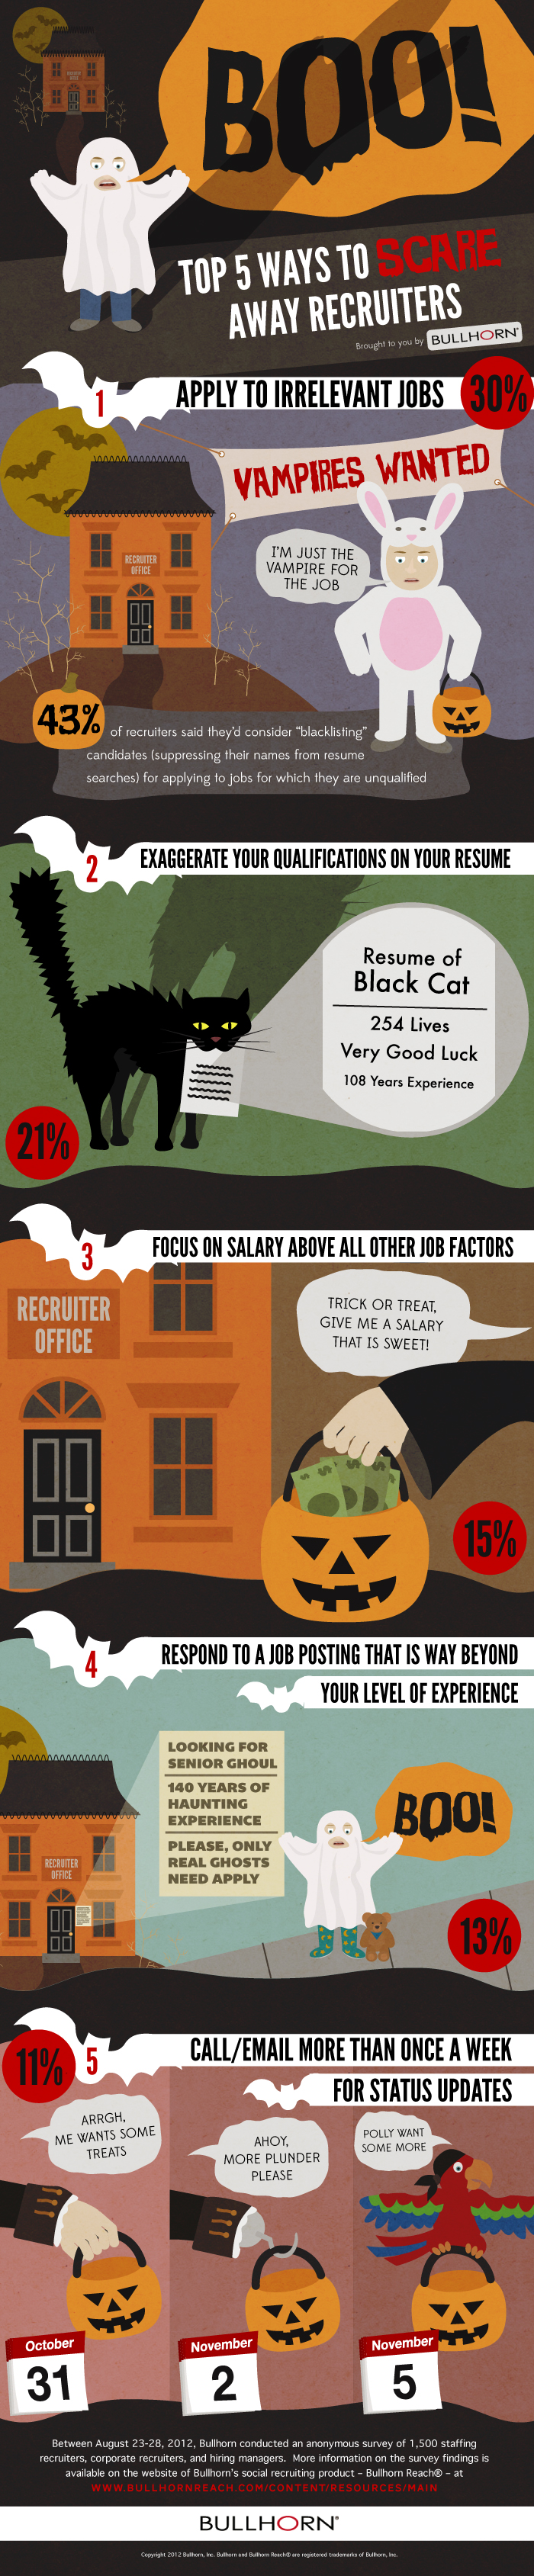 Boo! 5 Ways to Scare Away Recruiters